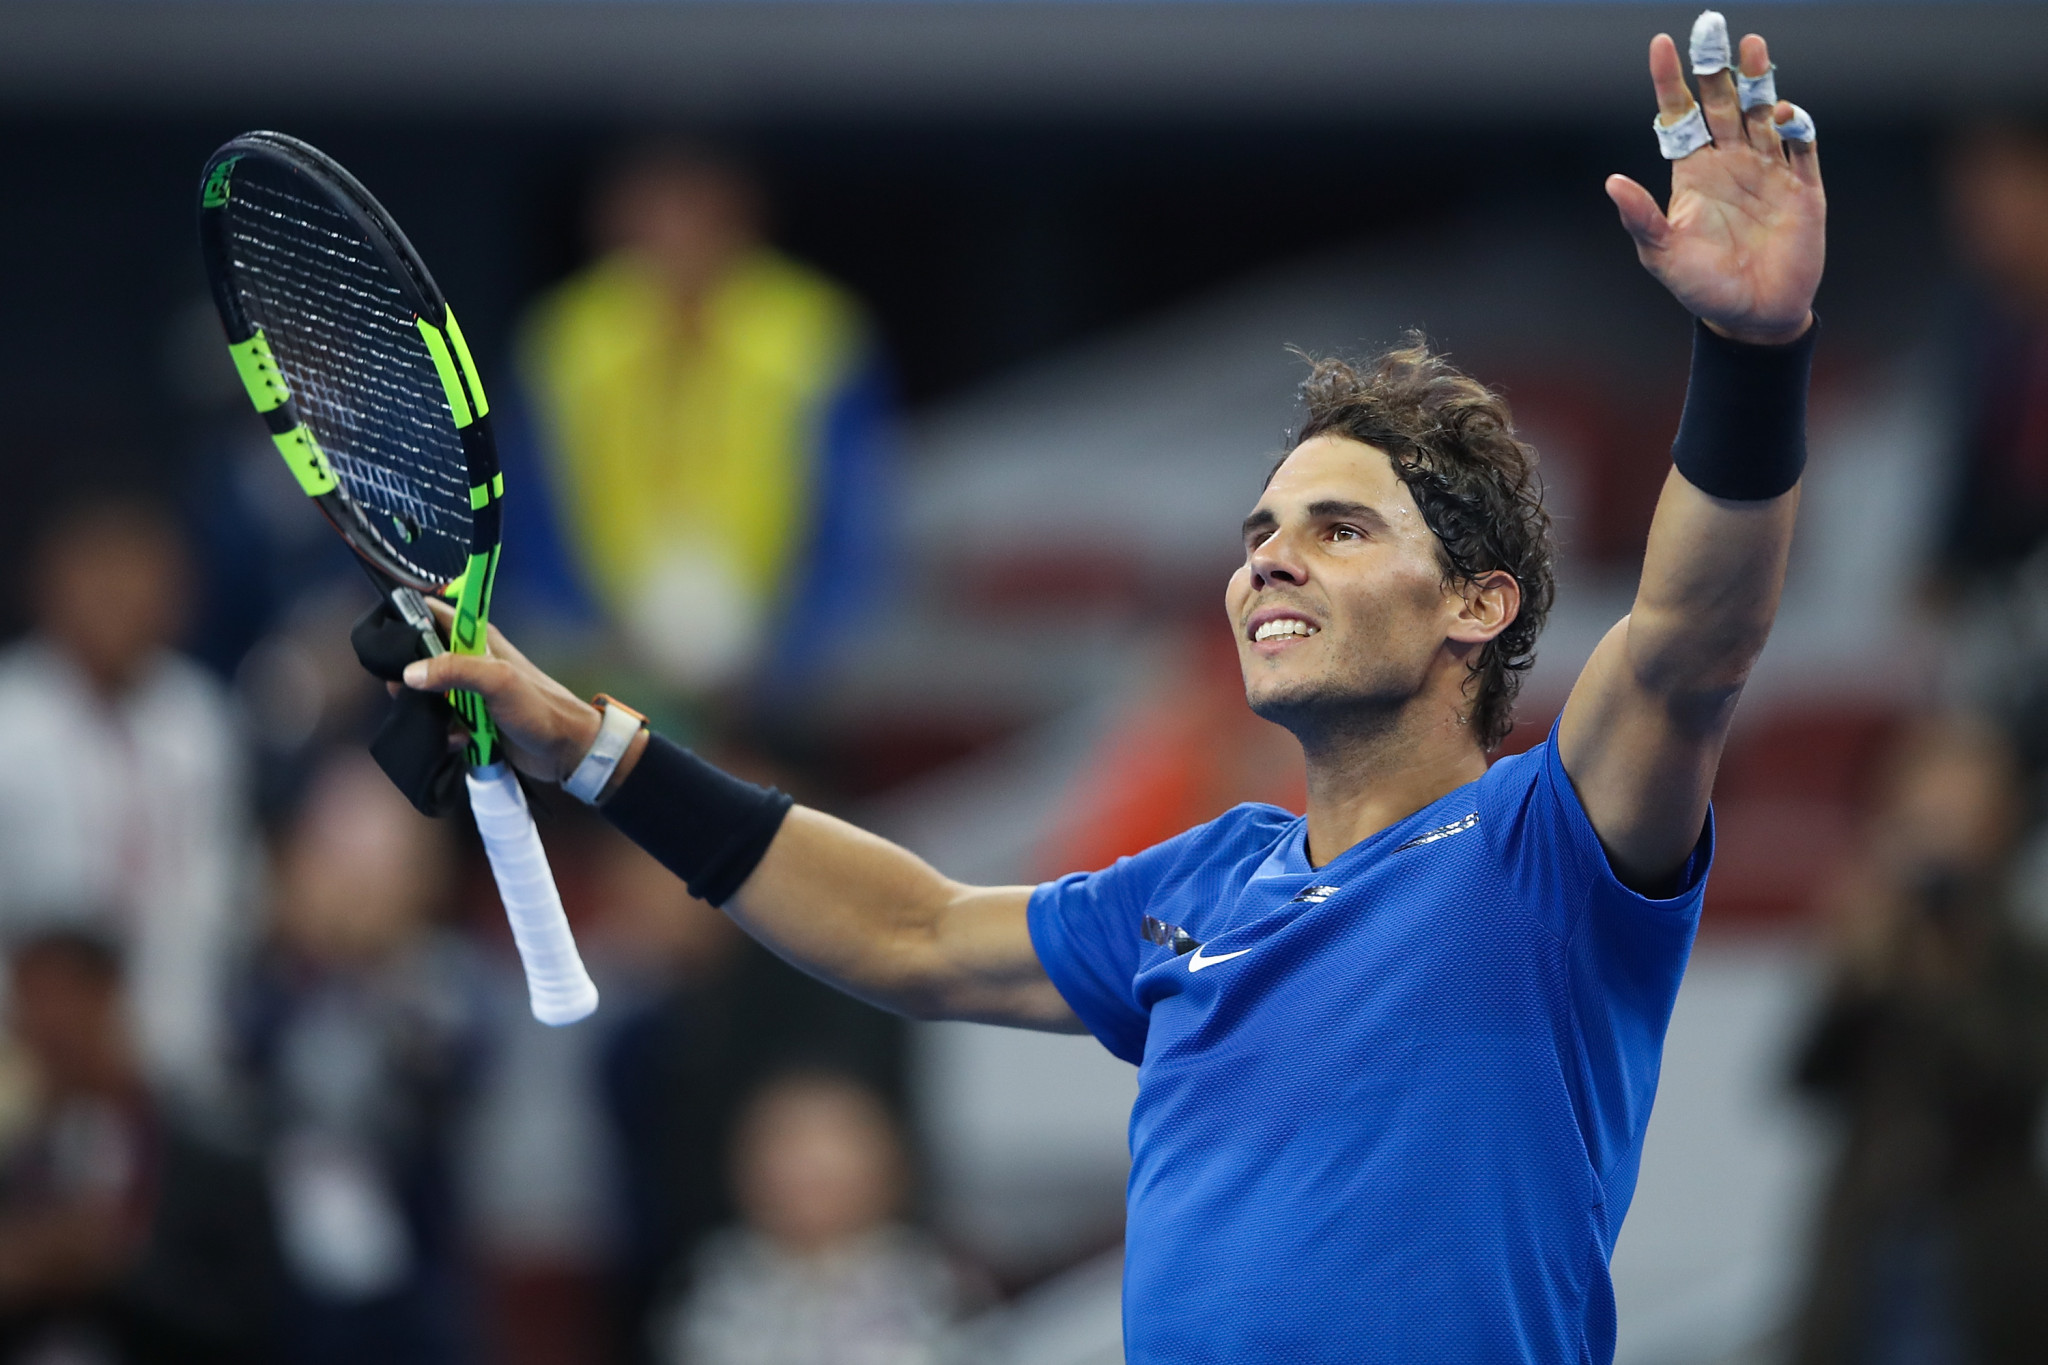 Nadal survives major scare against Pouille to reach second round of China Open